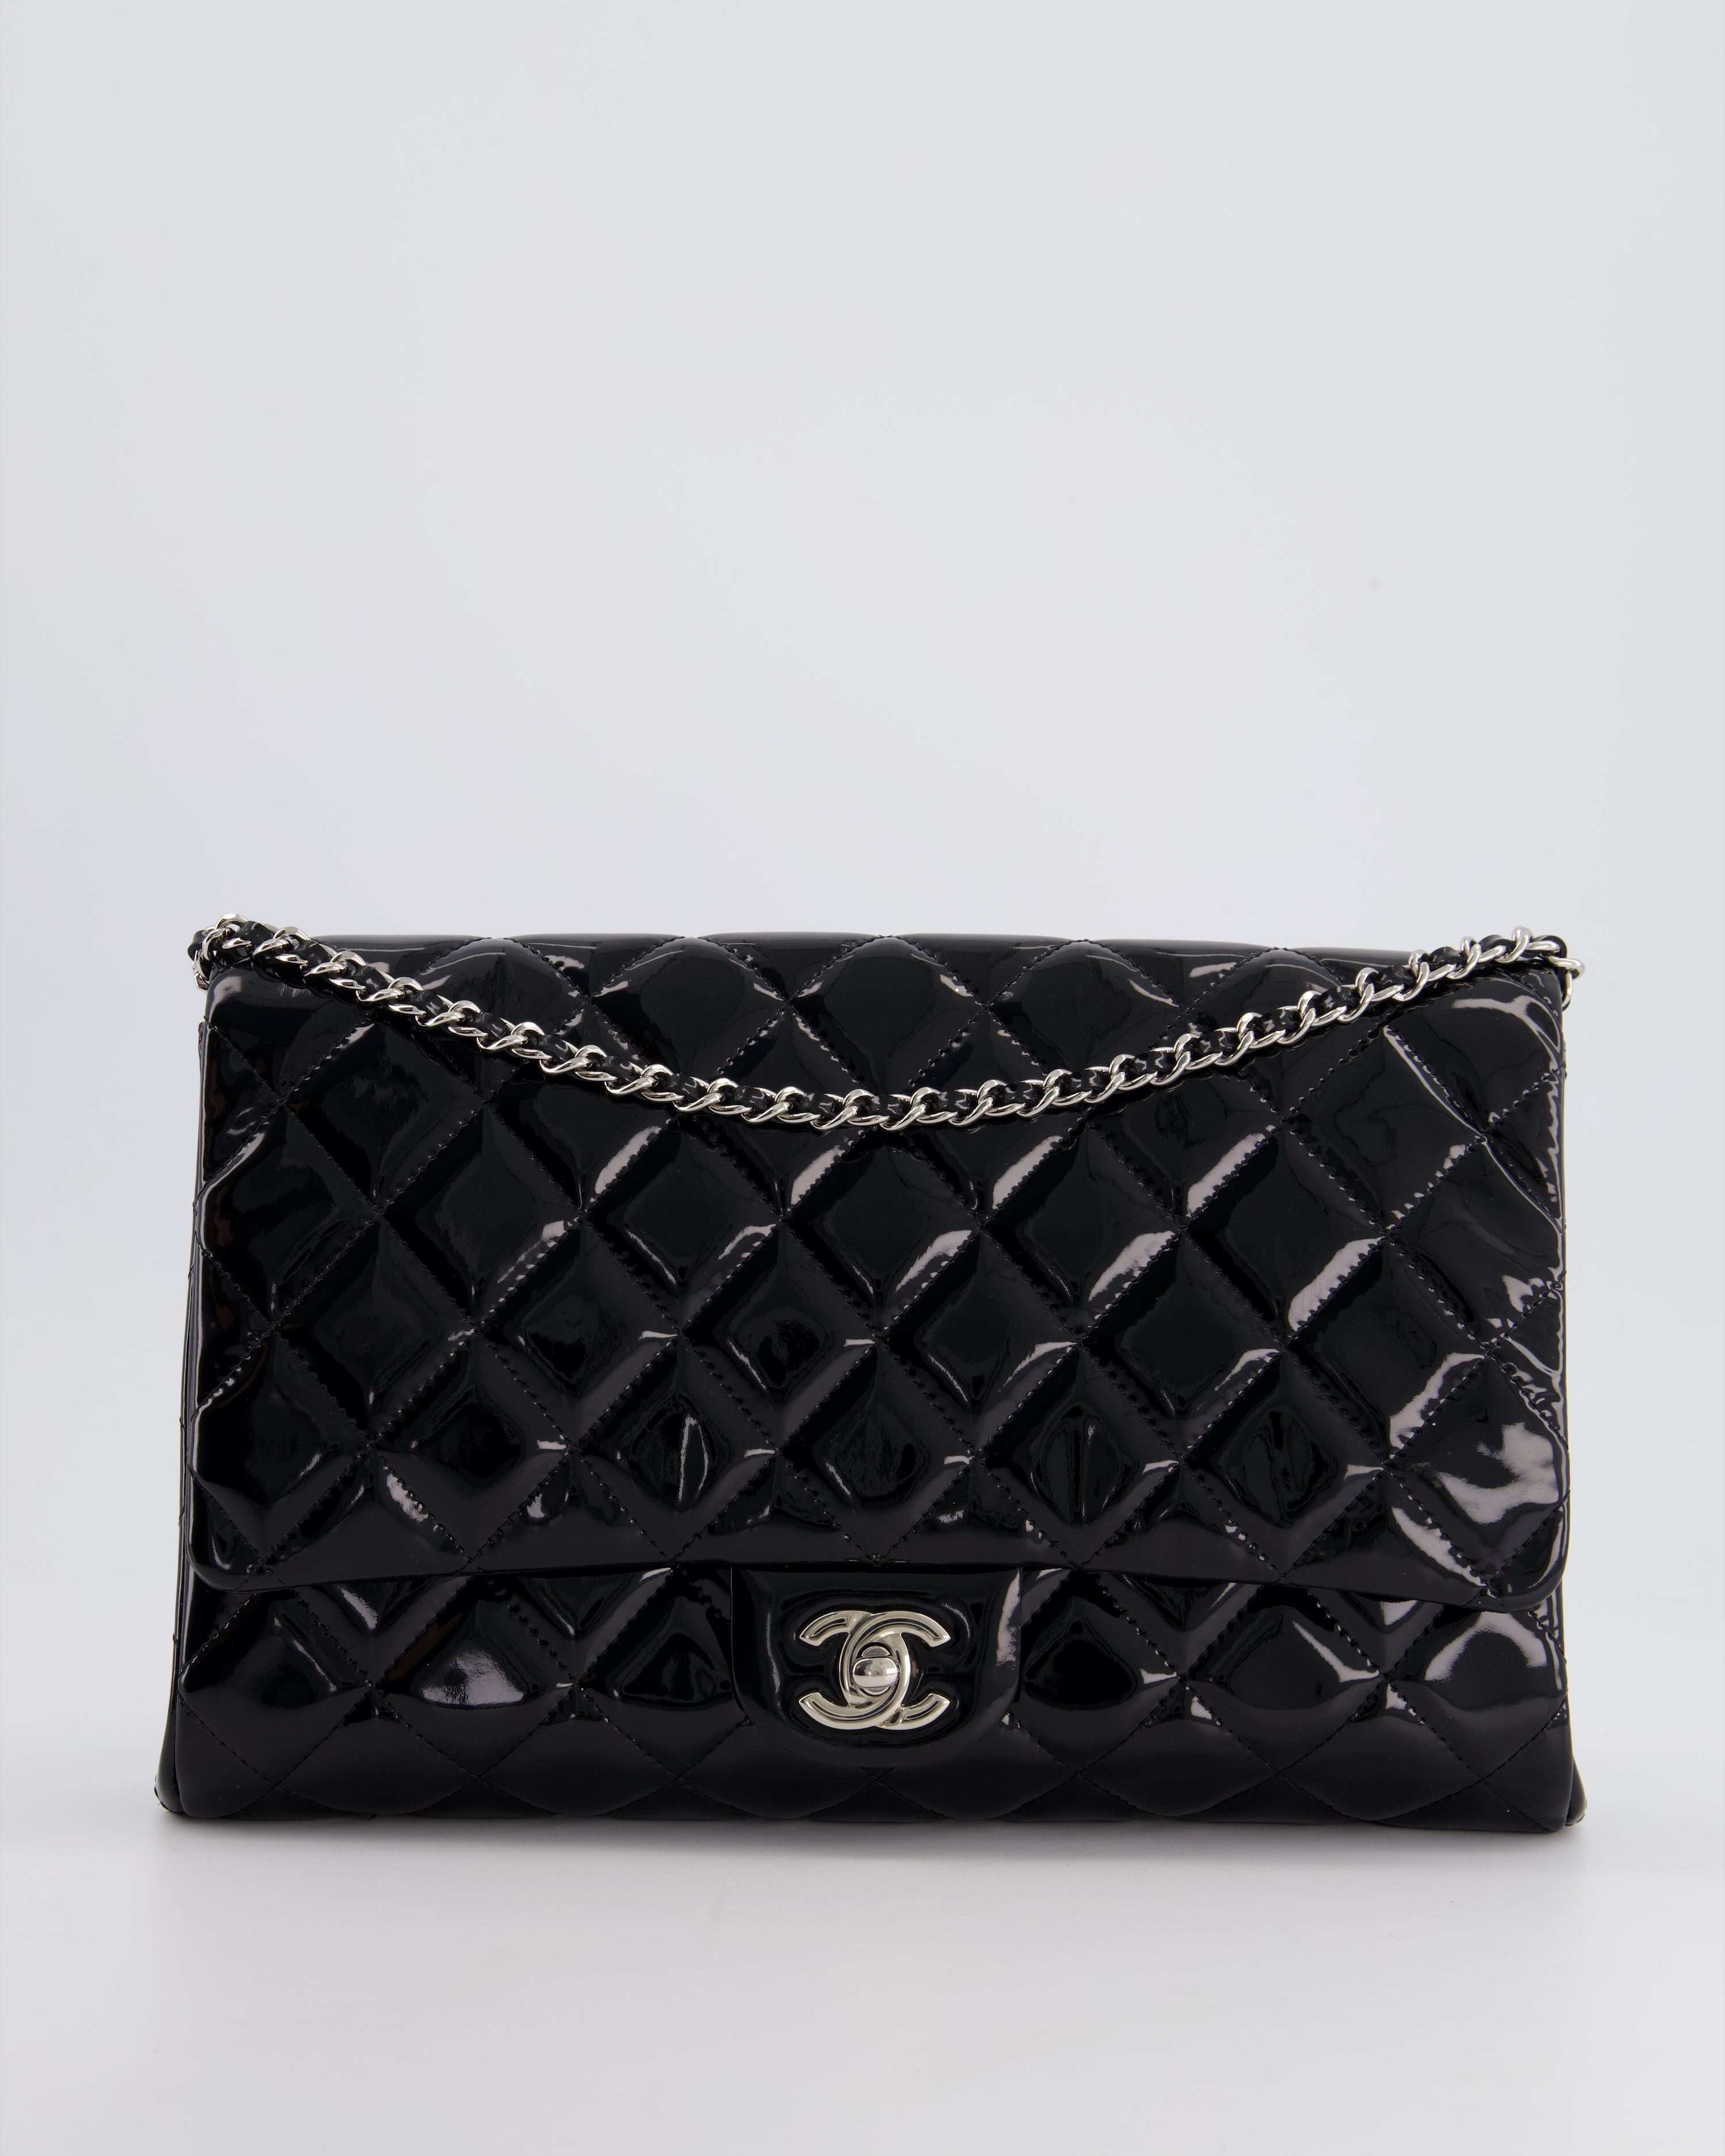 Chanel Black Clutch on Chain Flap Bag in Patent Leather with 